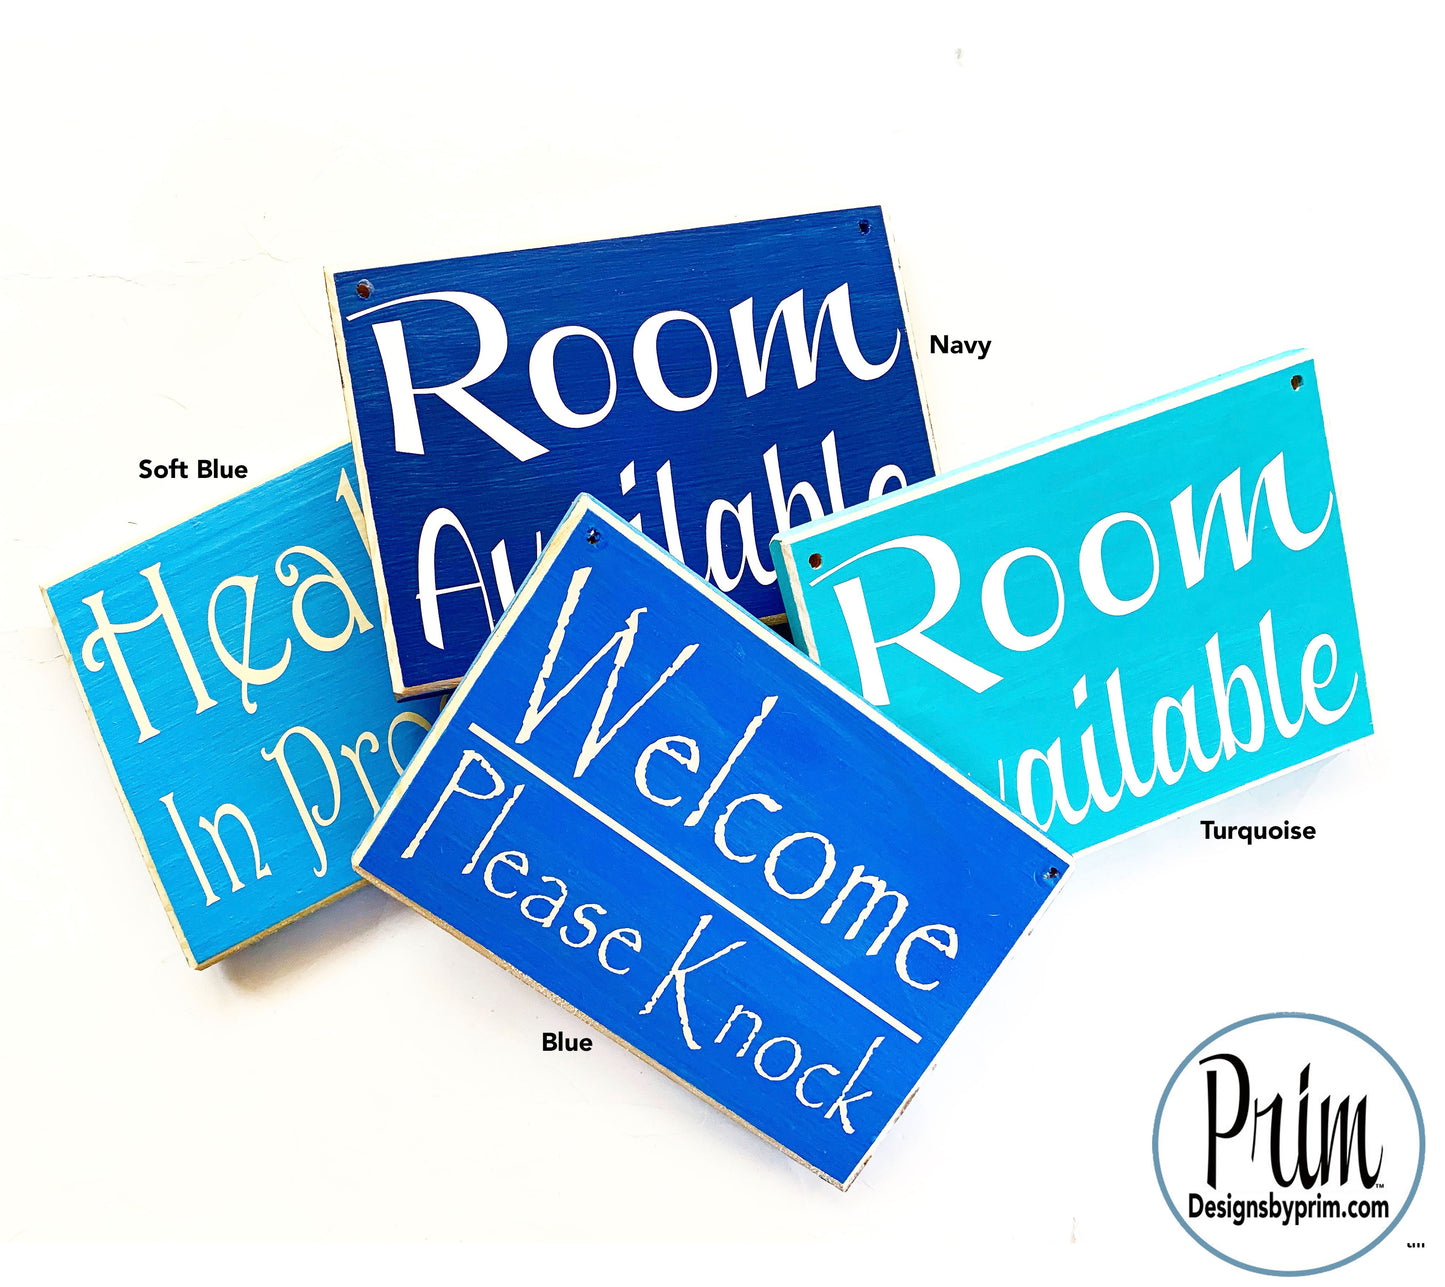 Designs by Prim Custom Wood Store Restroom Sign Color Chart